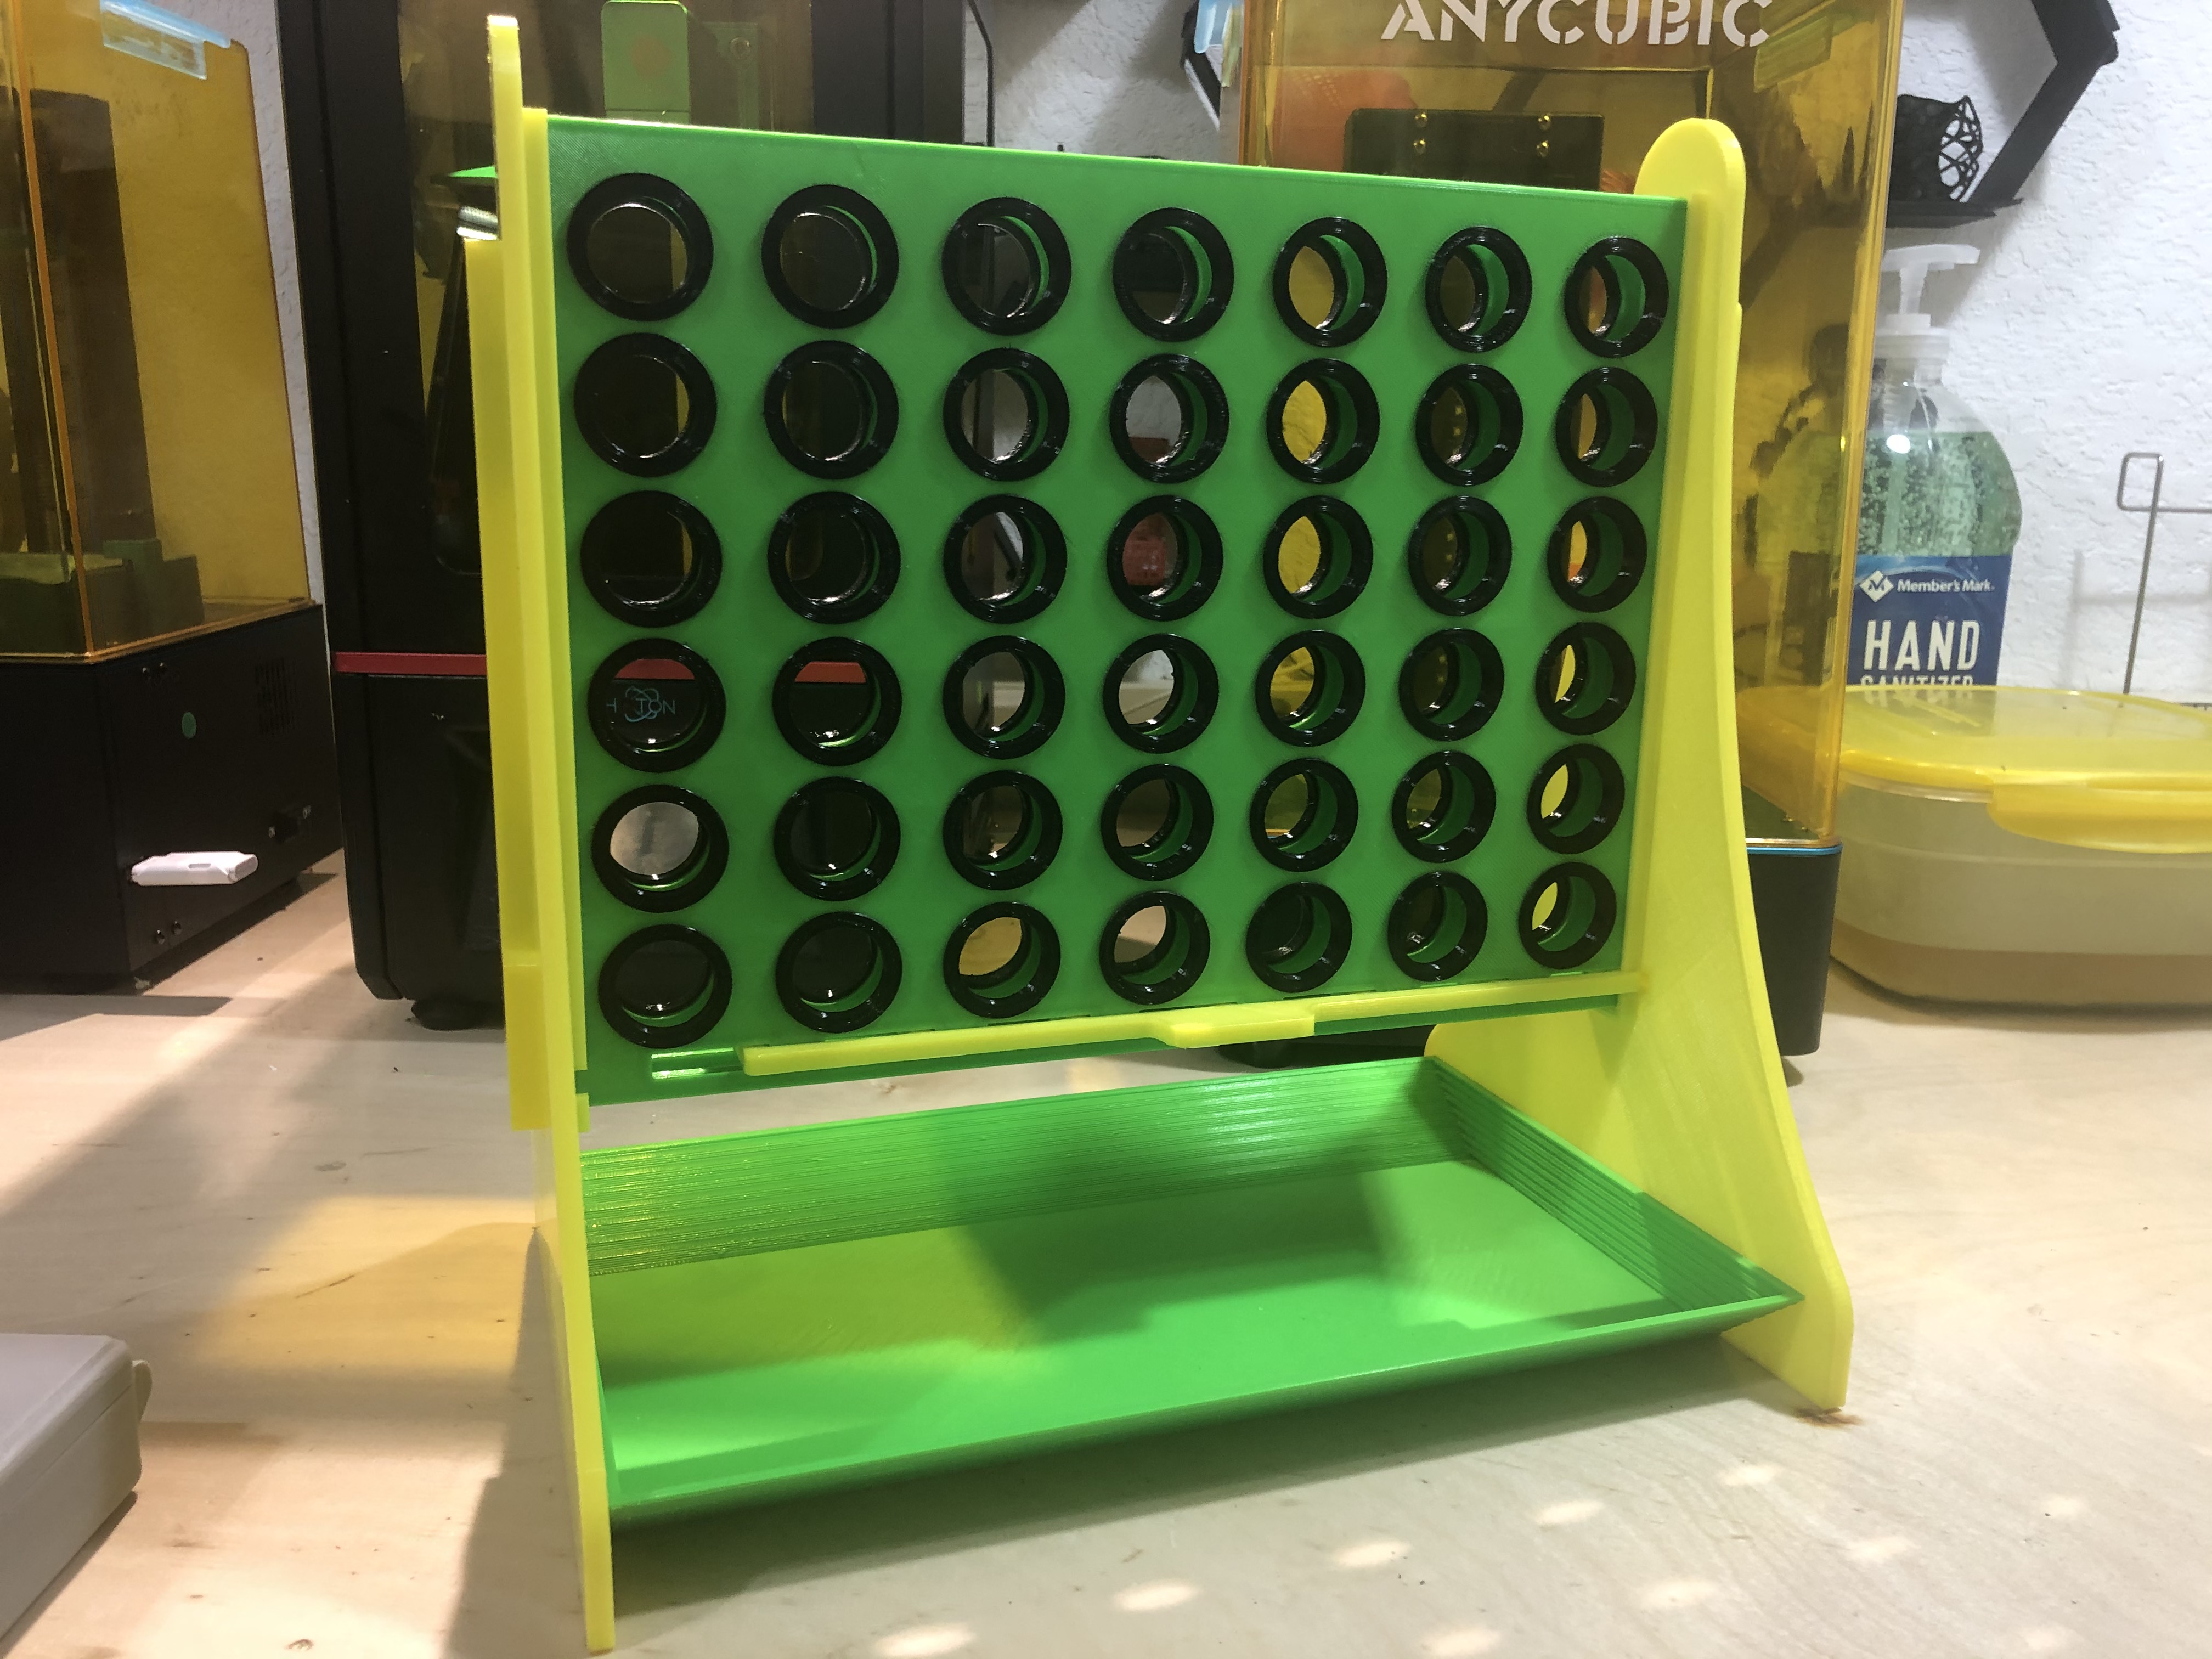 Full size connect 4 game